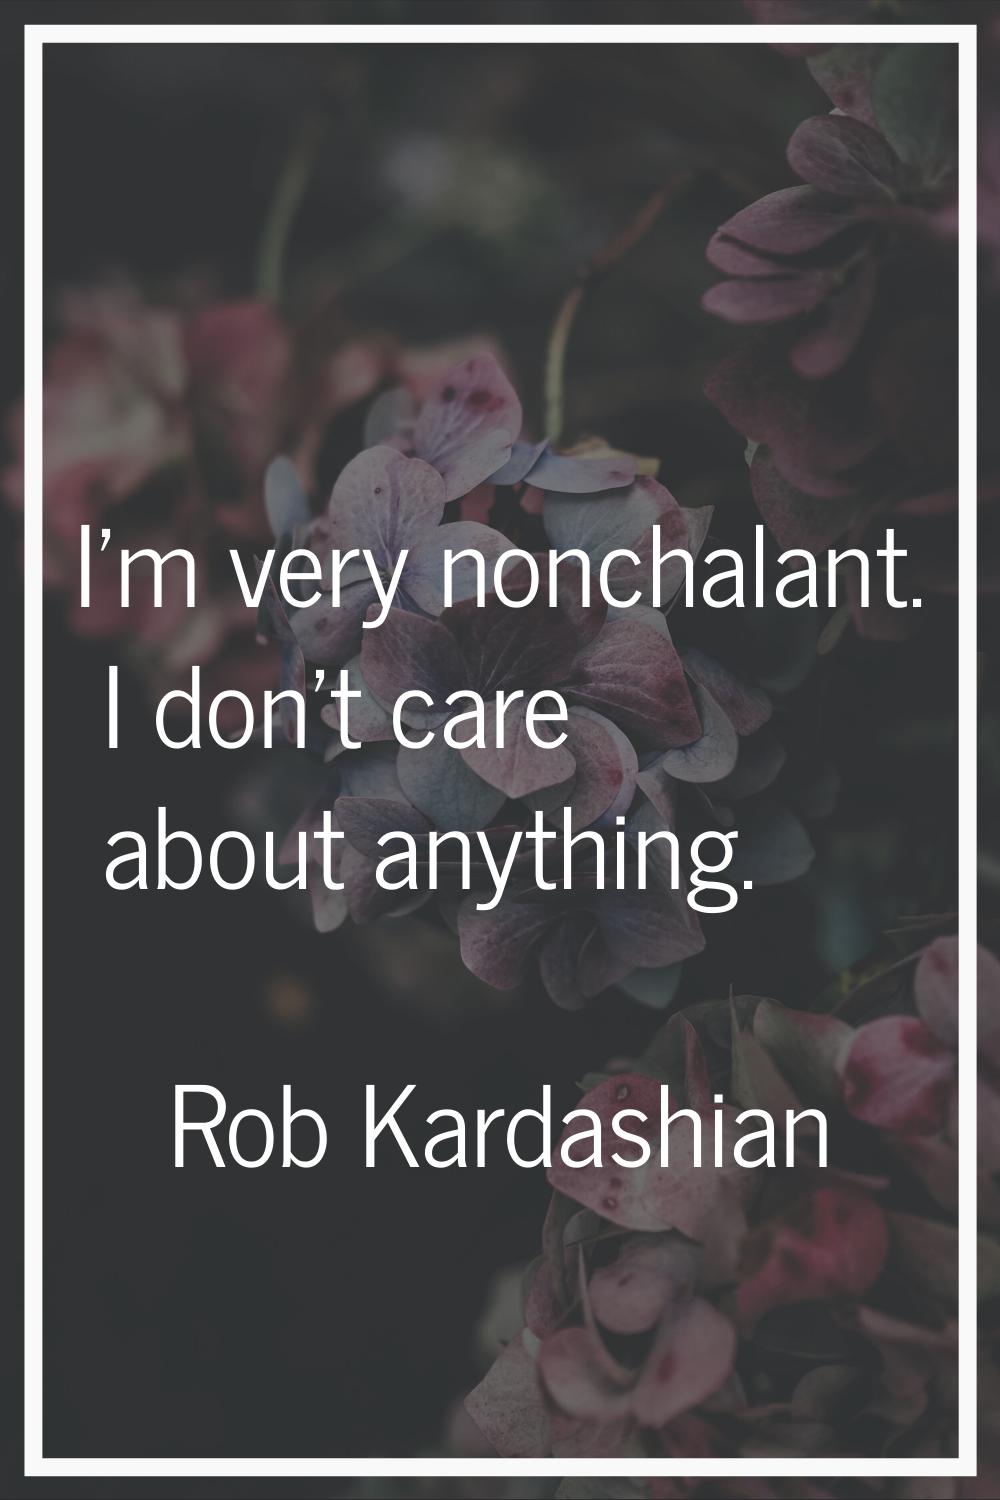 I'm very nonchalant. I don't care about anything.